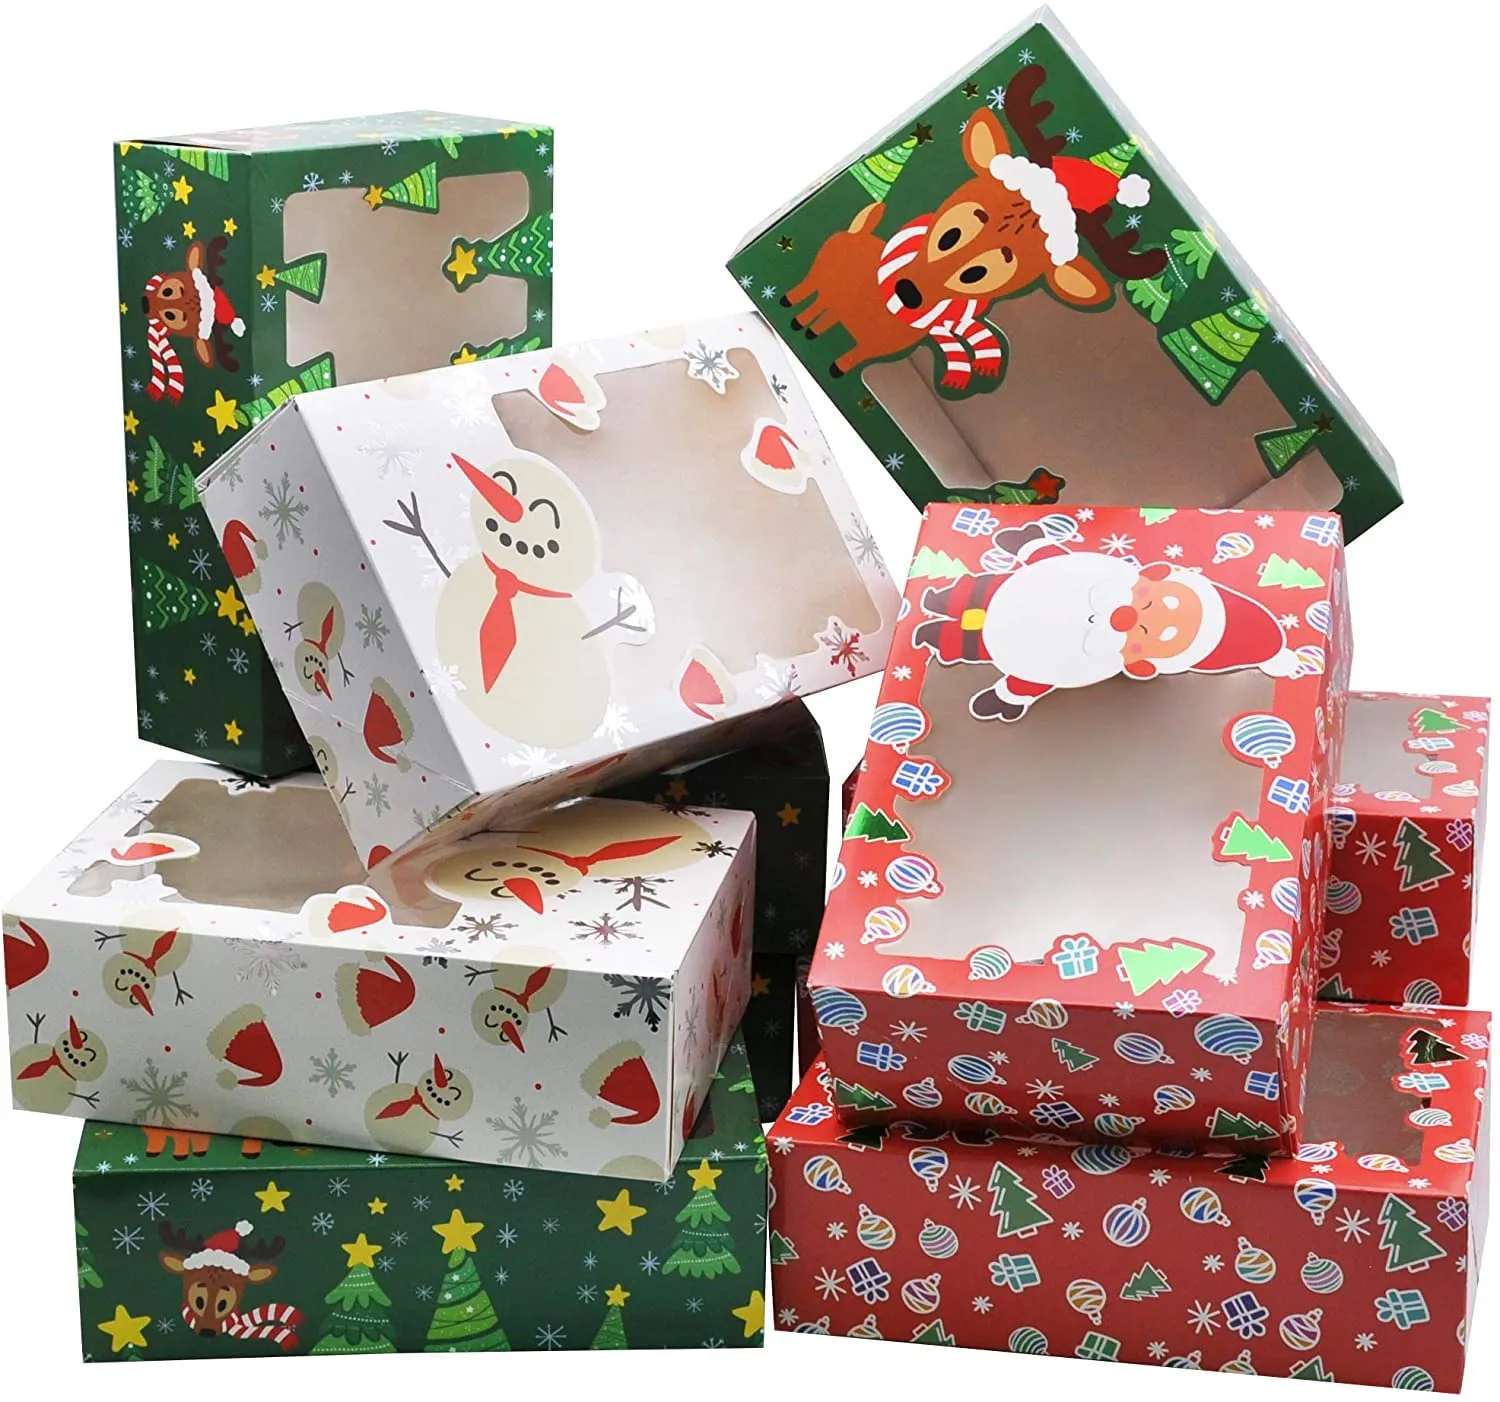 christmas gift card holders 10 cartoon designs christmas gift wrapping boxes drawer style holiday gift card box for xmas party decoration